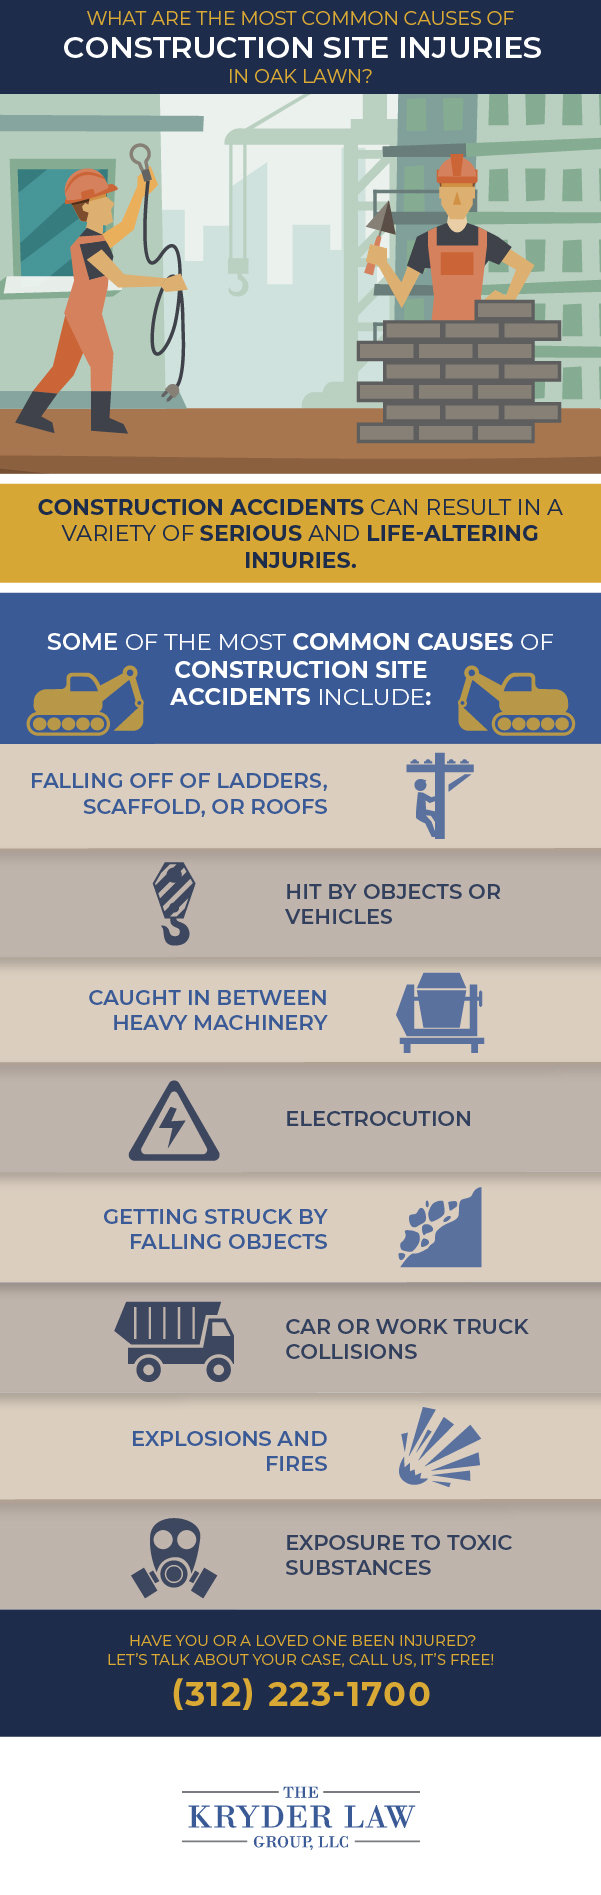 The Benefits of Hiring an Oak Lawn Construction Accident Lawyer Infographic